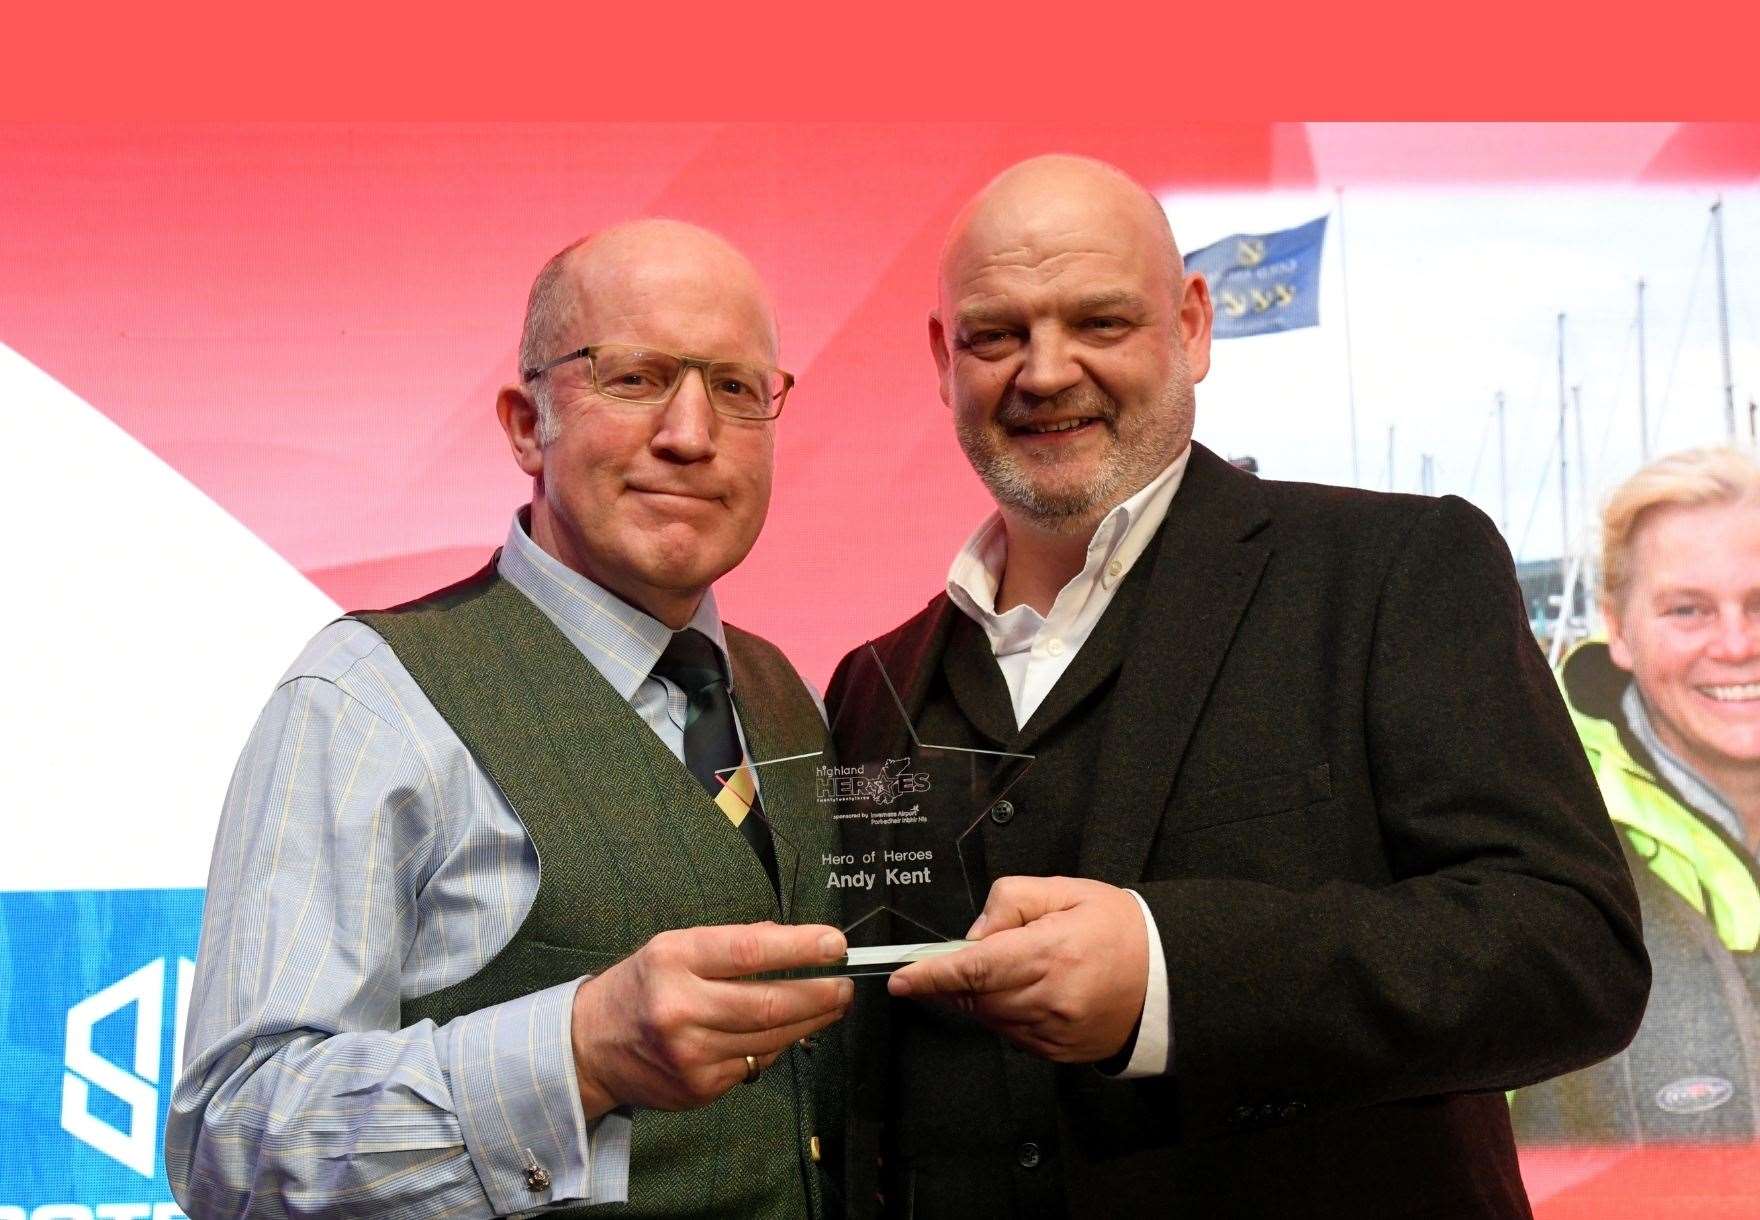 Andy Kent (left) was named overall hero of heroes in 2023. Picture: James Mackenzie